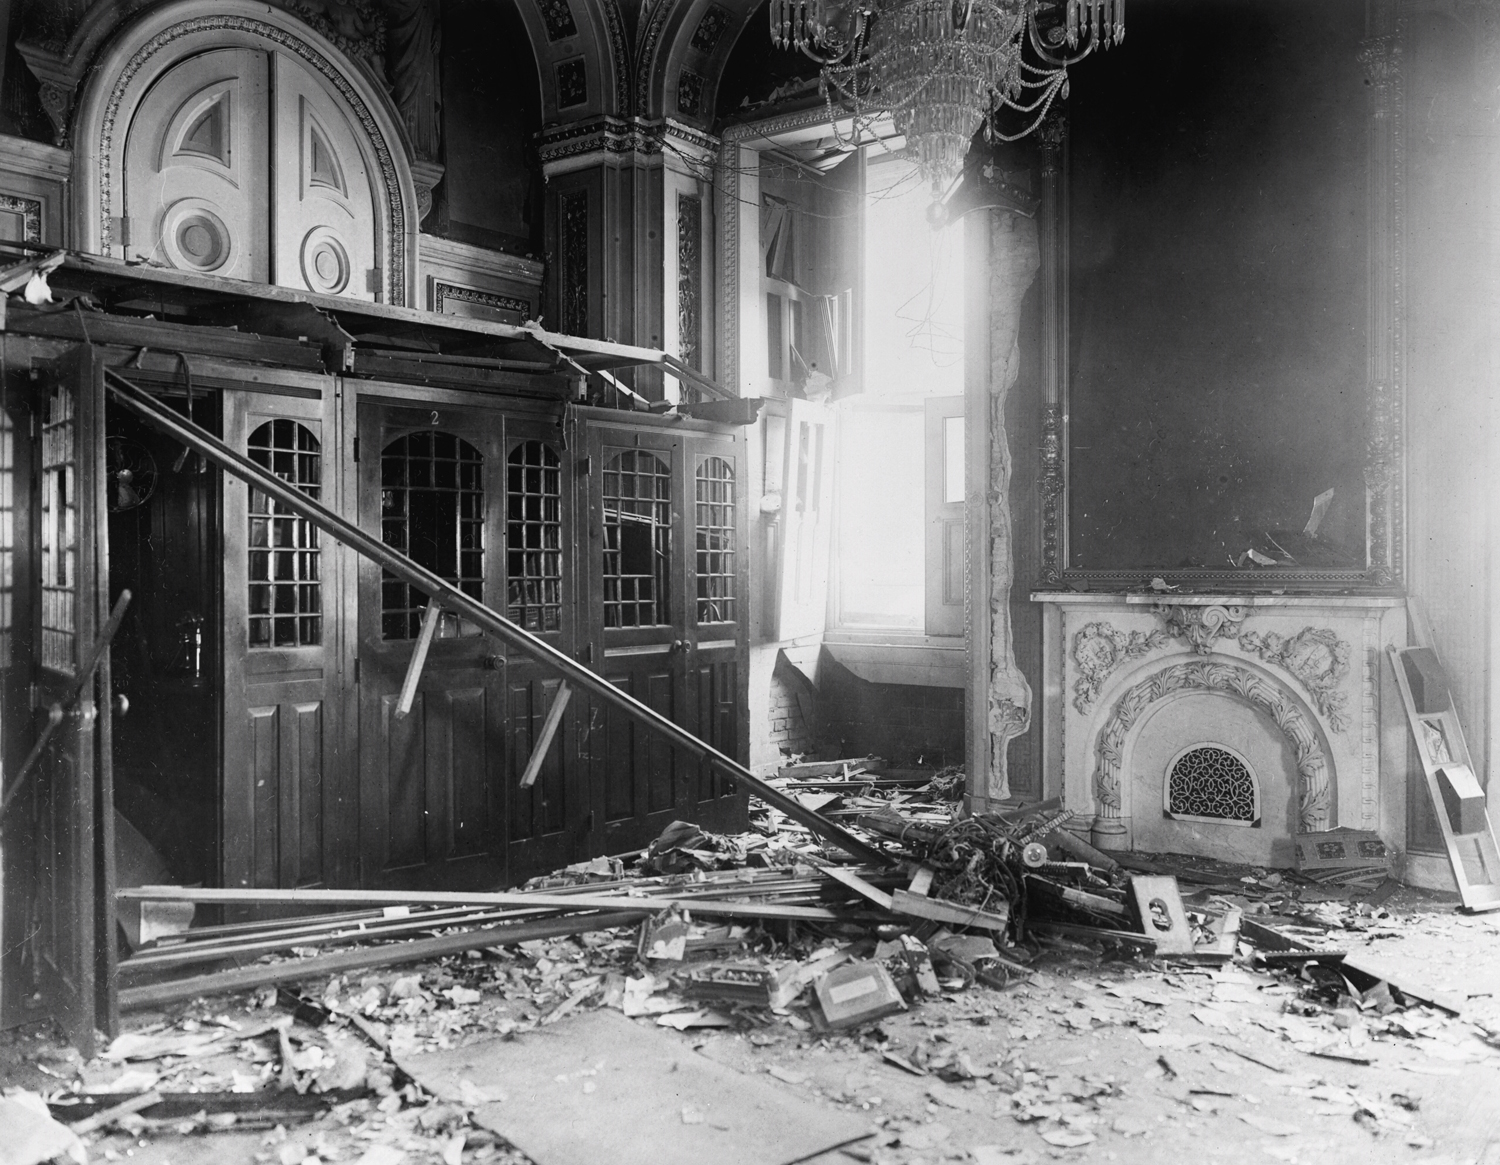 A photograph taken in the aftermath of an explosion that rocked the U.S. Capitol on July 2, 1915.